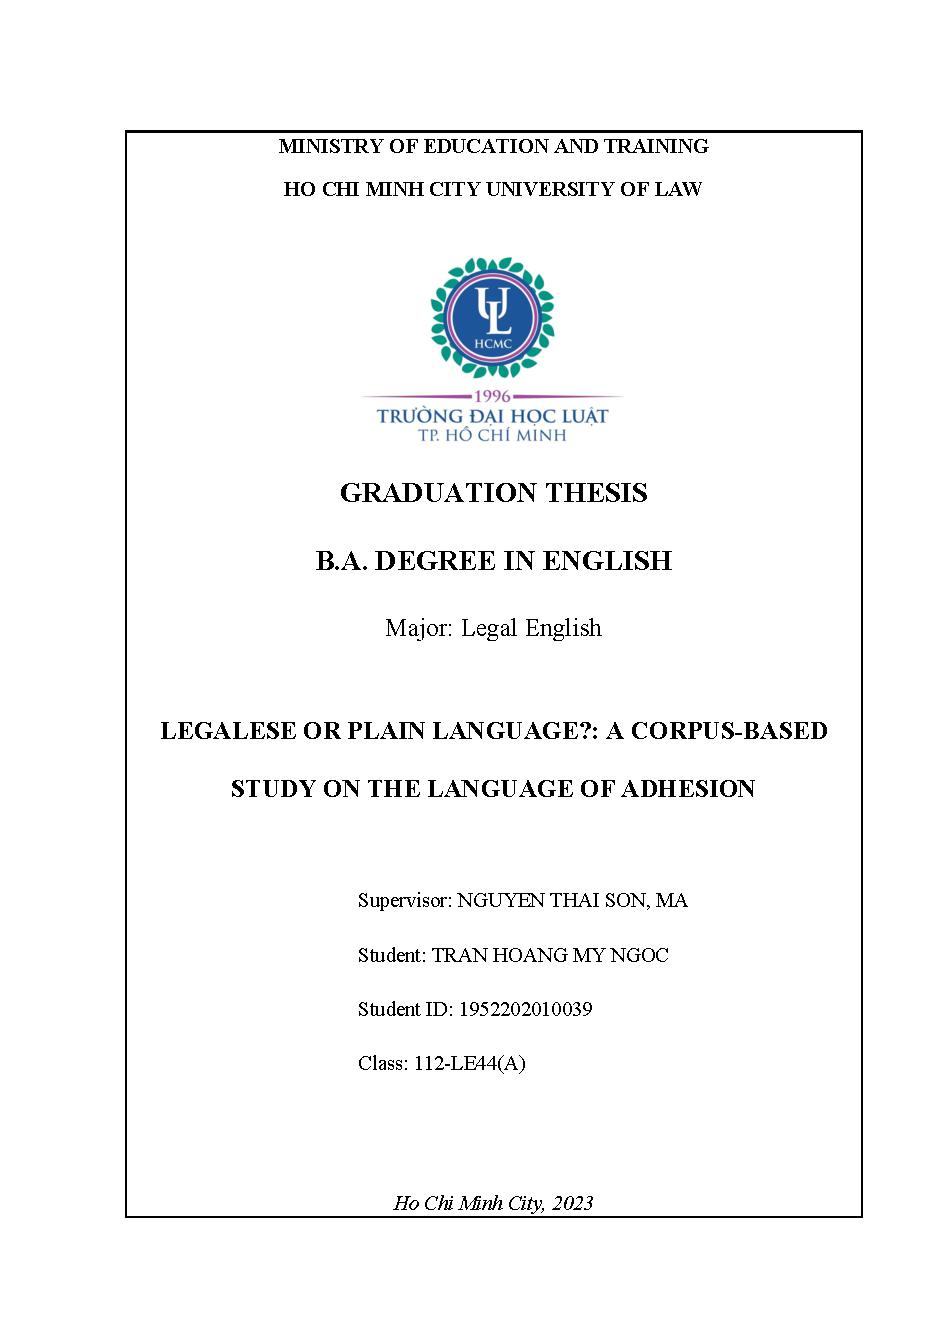 Legalese or Plain Language A corpus-based study on the language of adhesion contracts